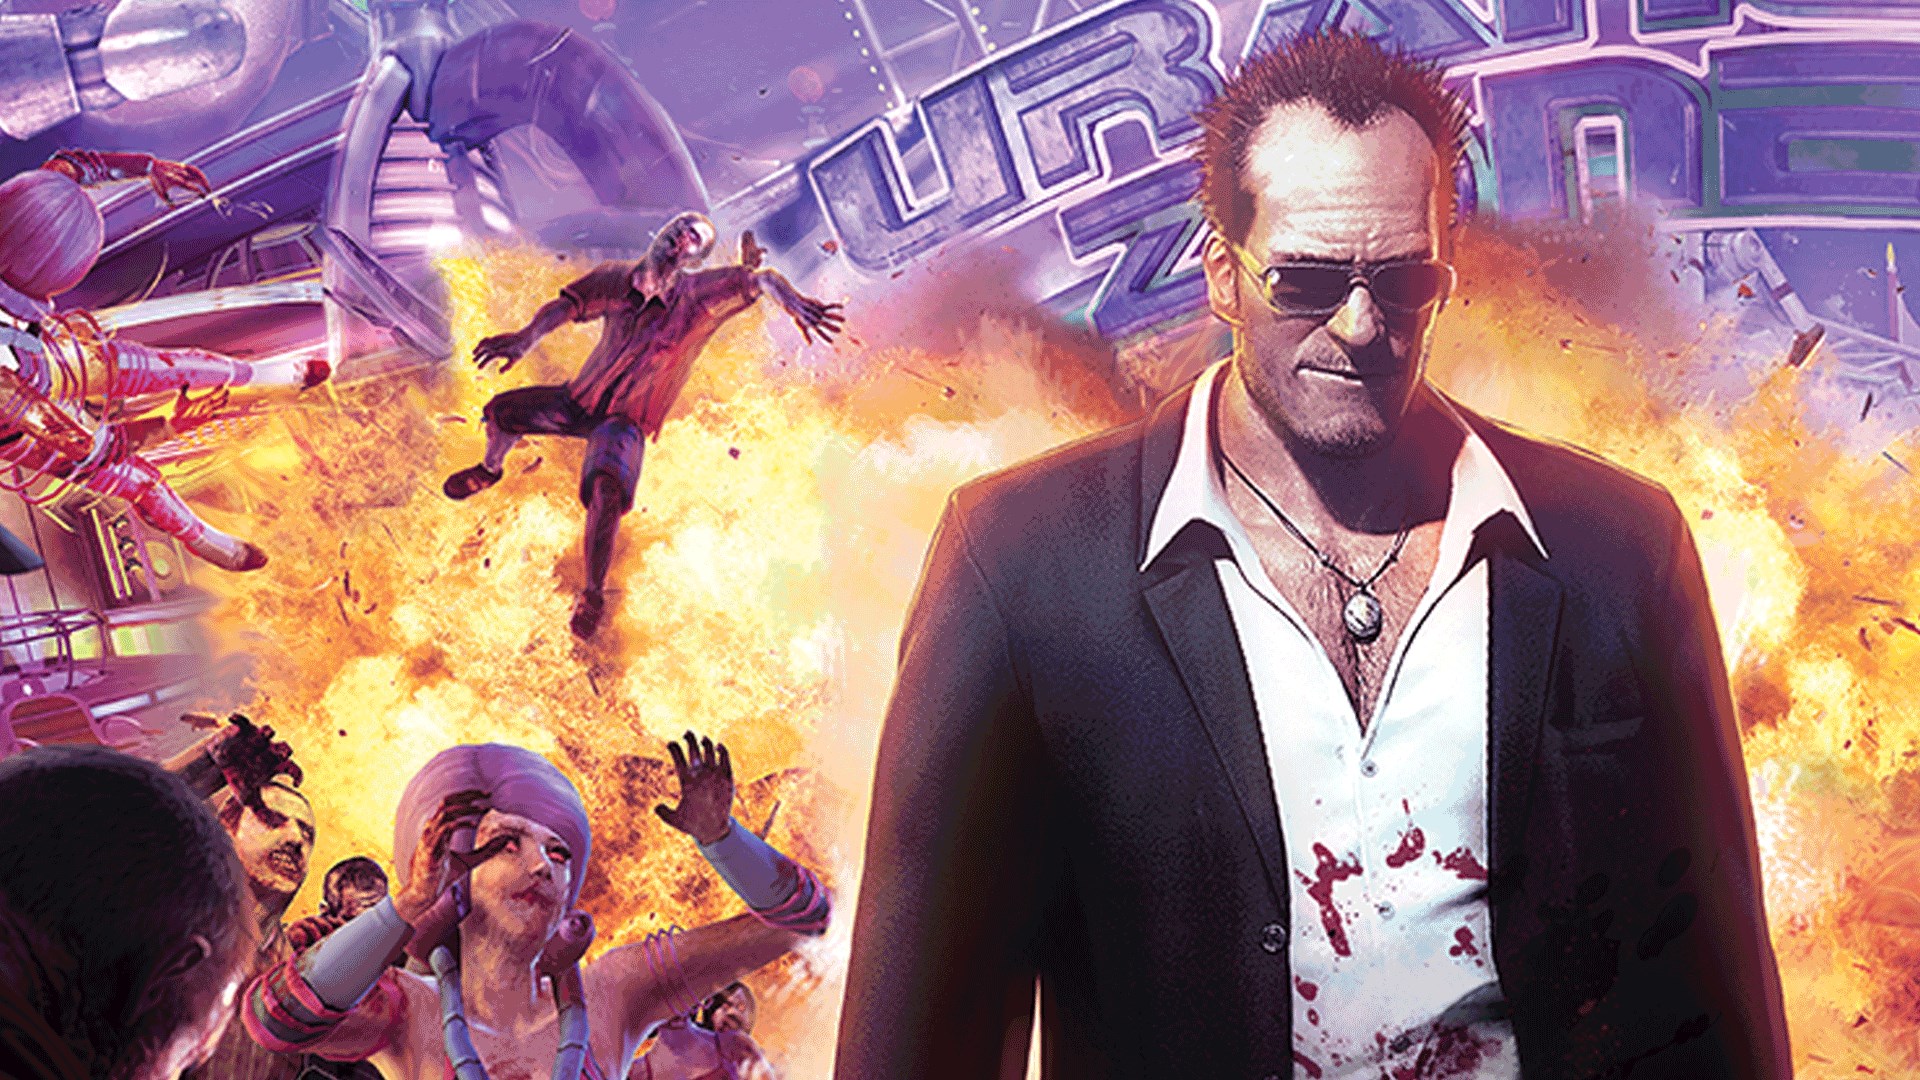 Dead Rising 2: Off the Record on Steam